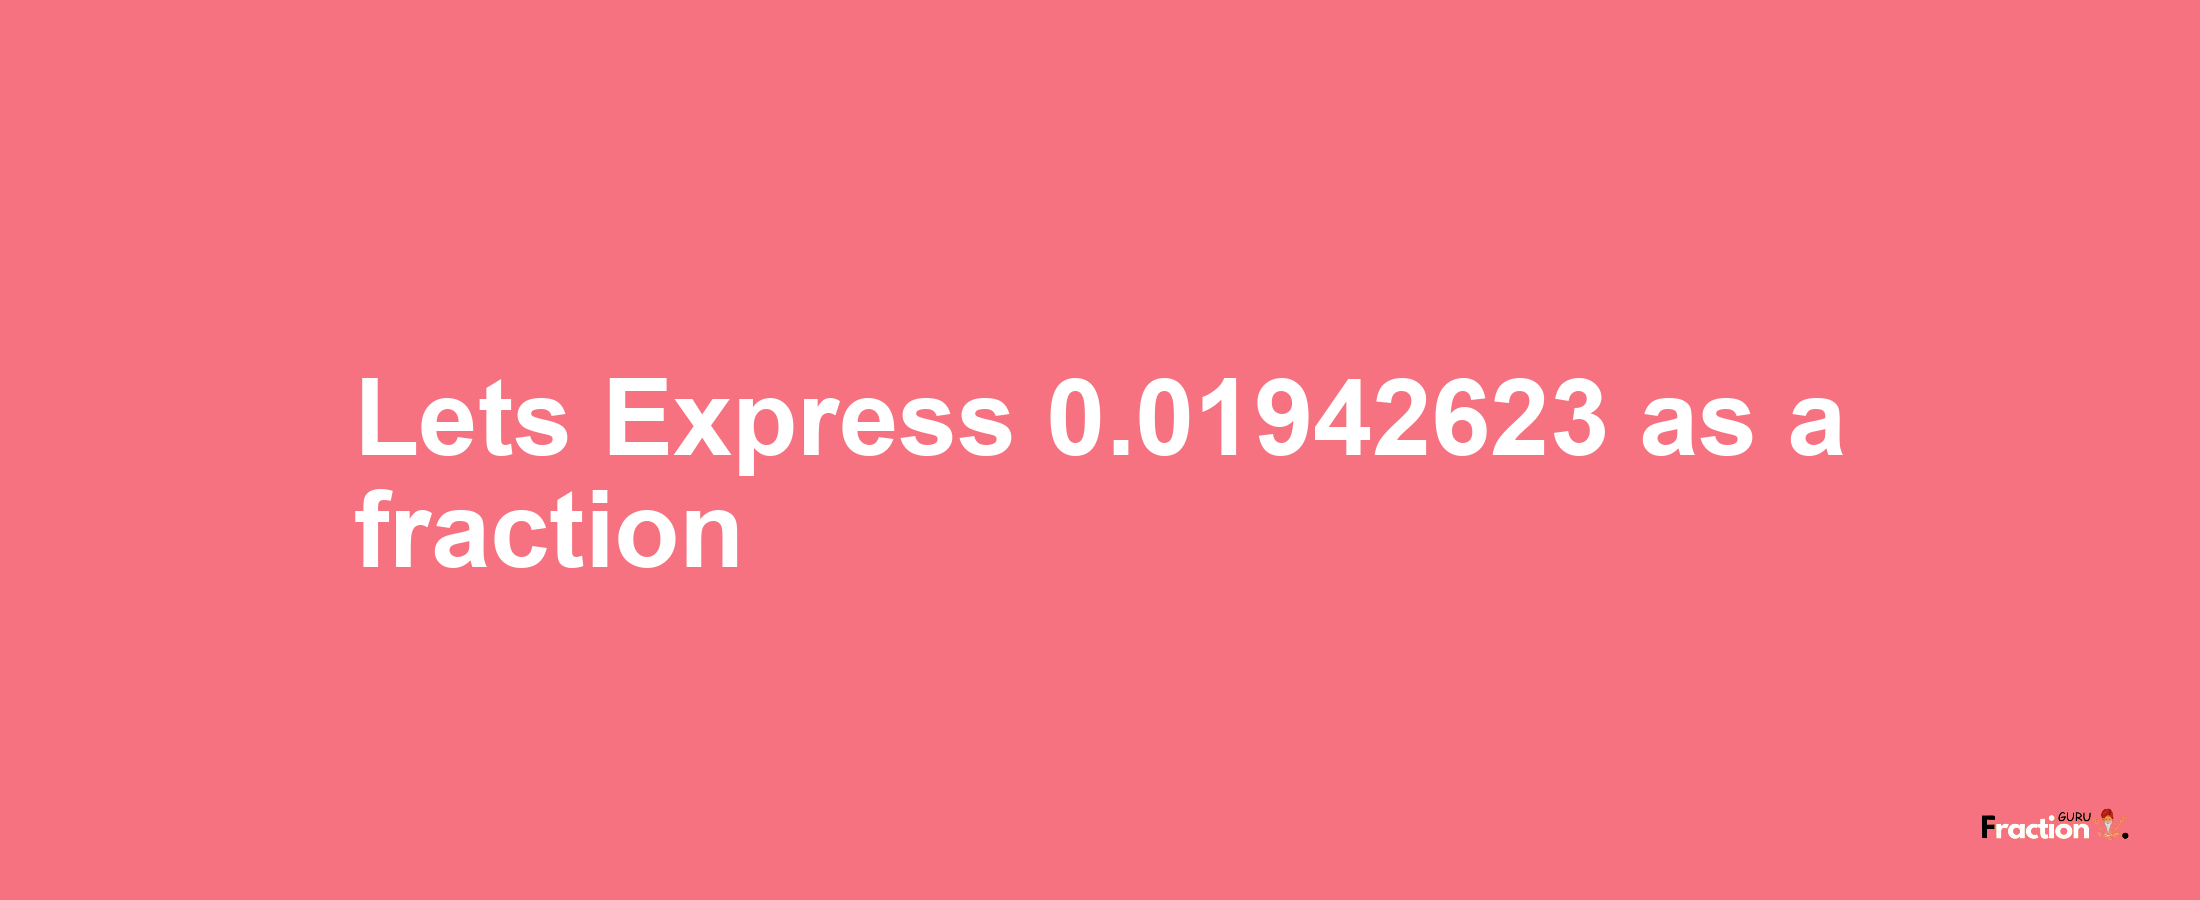 Lets Express 0.01942623 as afraction